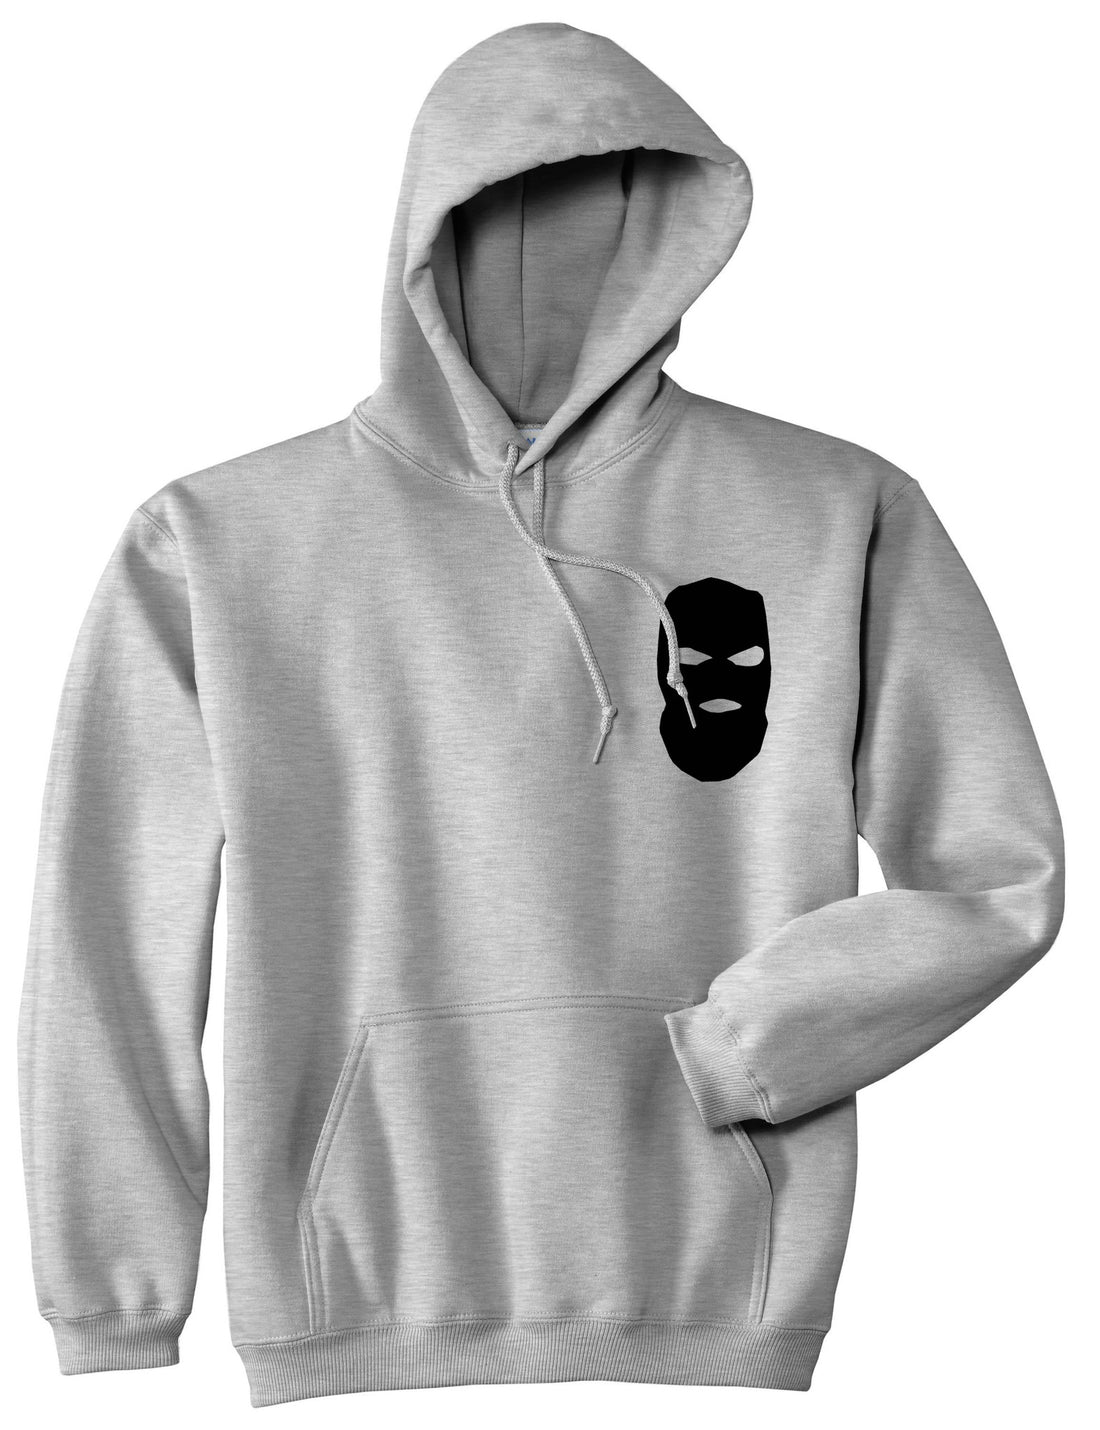 Ski Mask Way Robber Chest Logo Boys Kids Pullover Hoodie Hoody in Grey By Kings Of NY